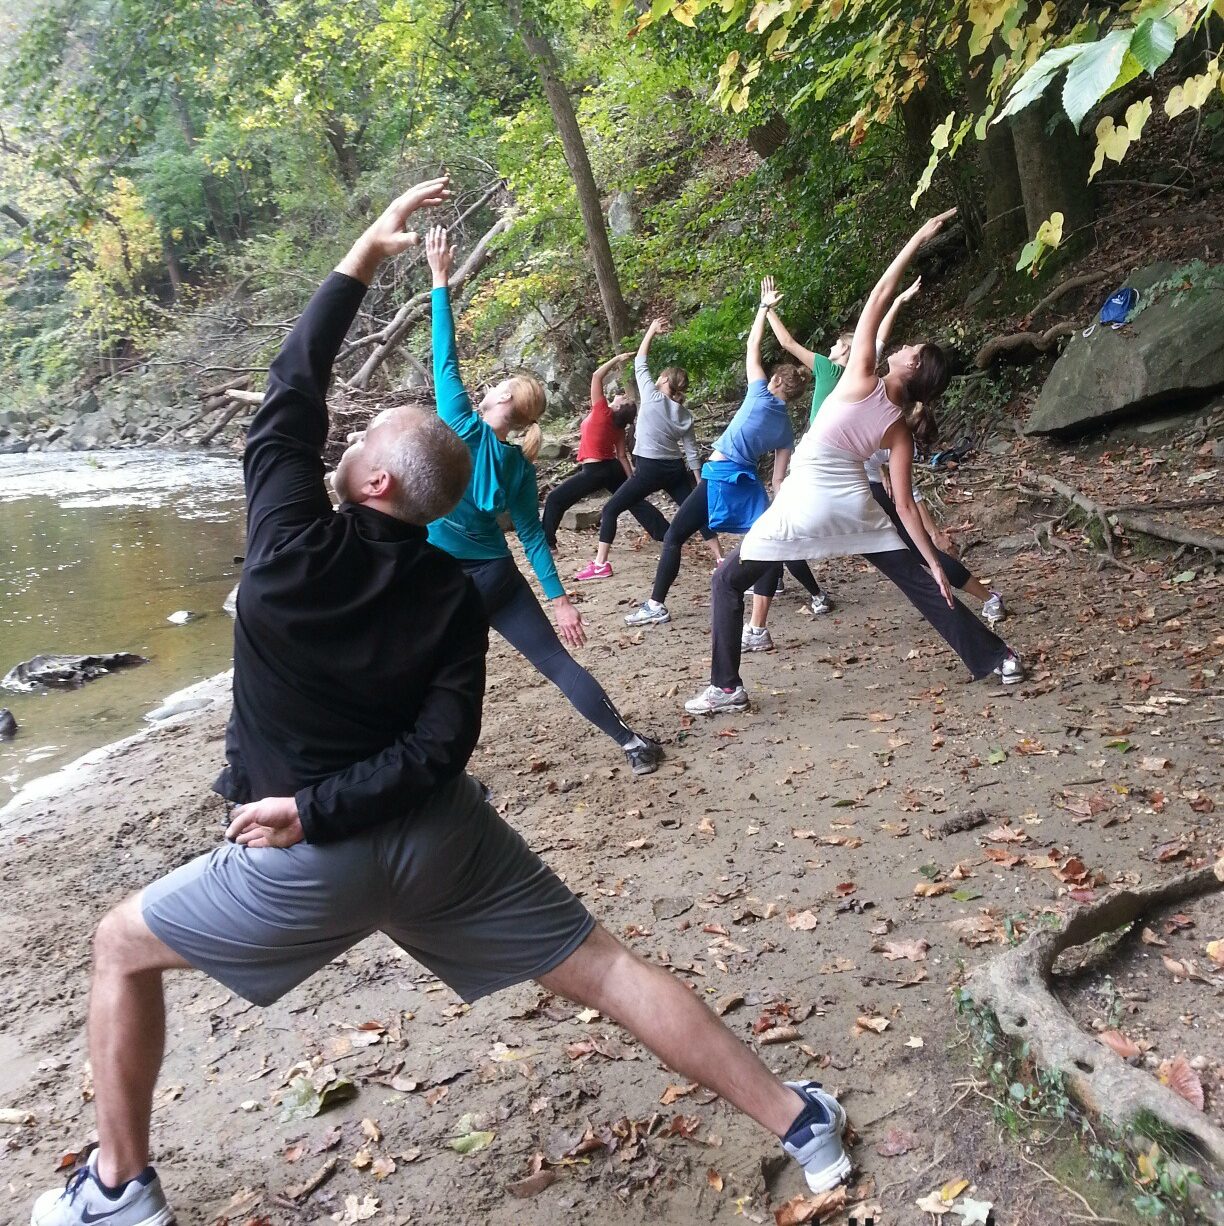 Yoga HIkes for all!